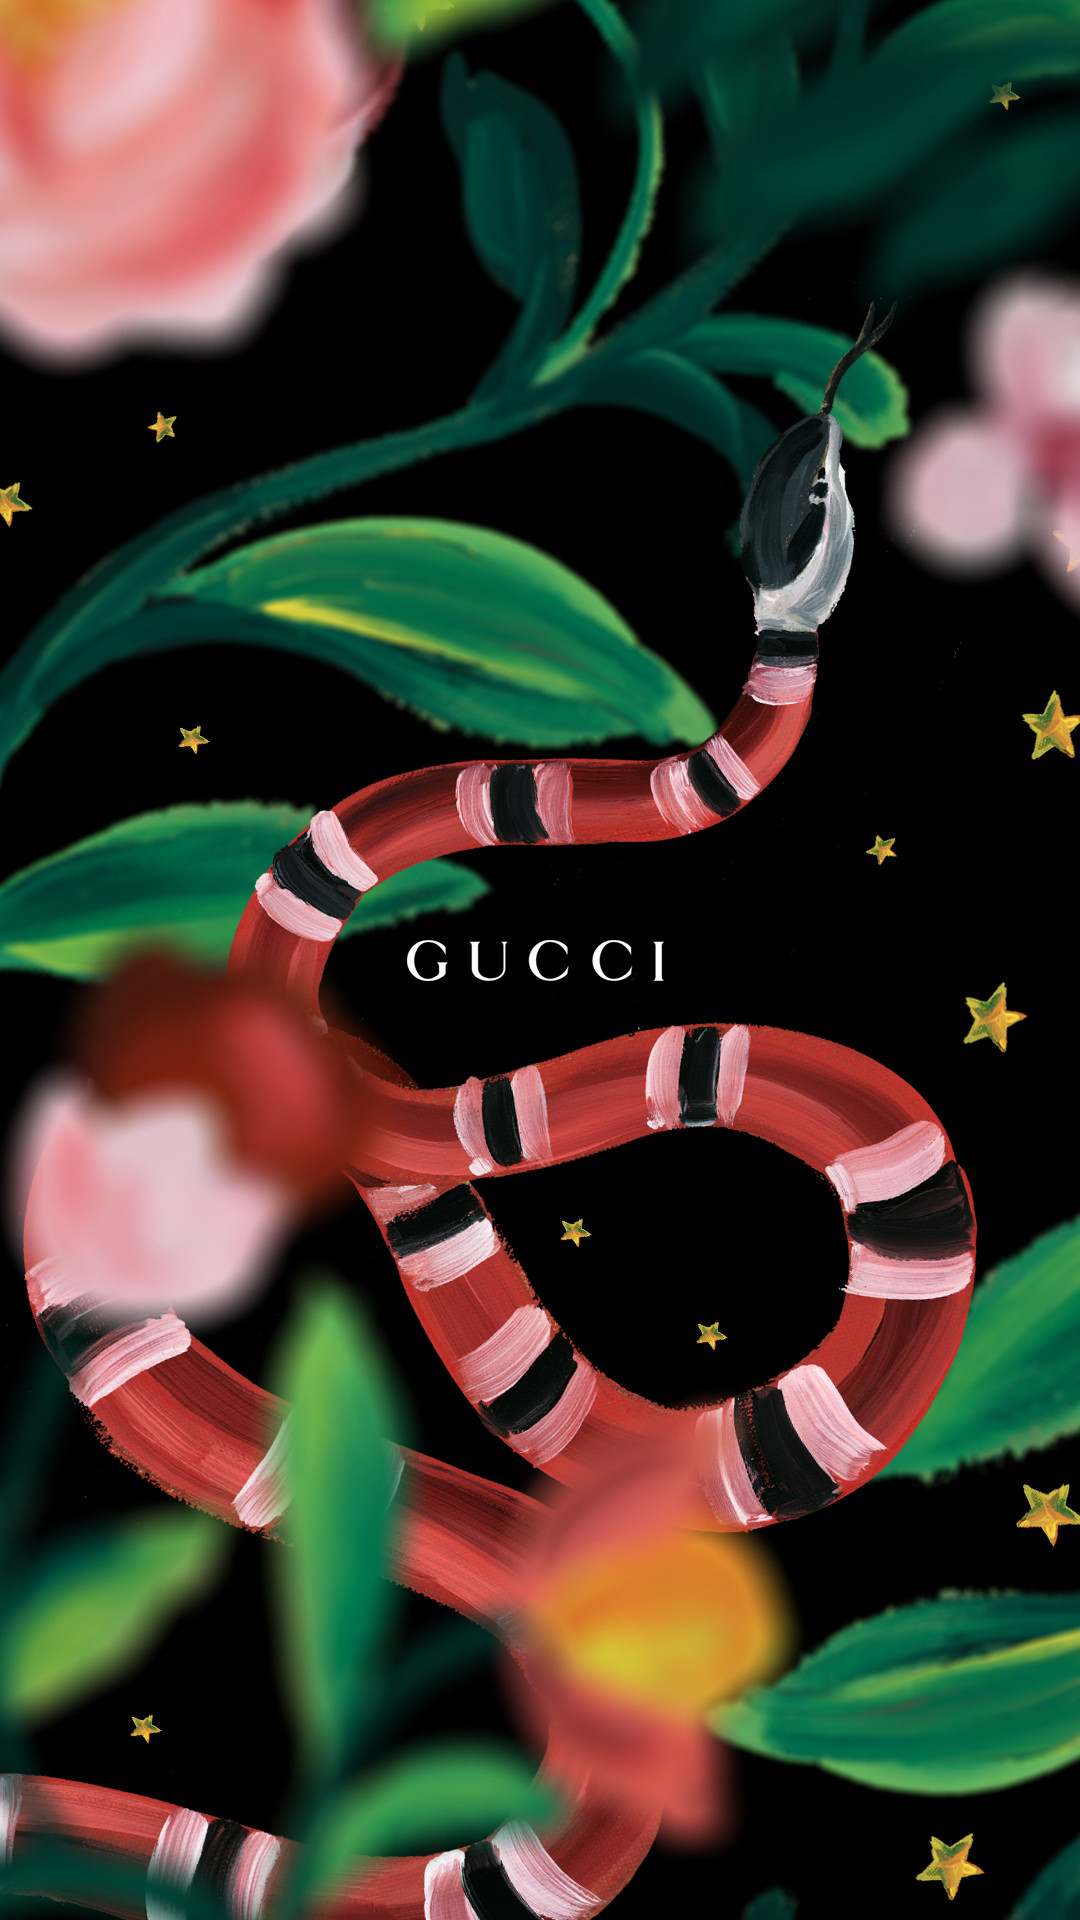 Gucci Snake Iphone Wallpapers